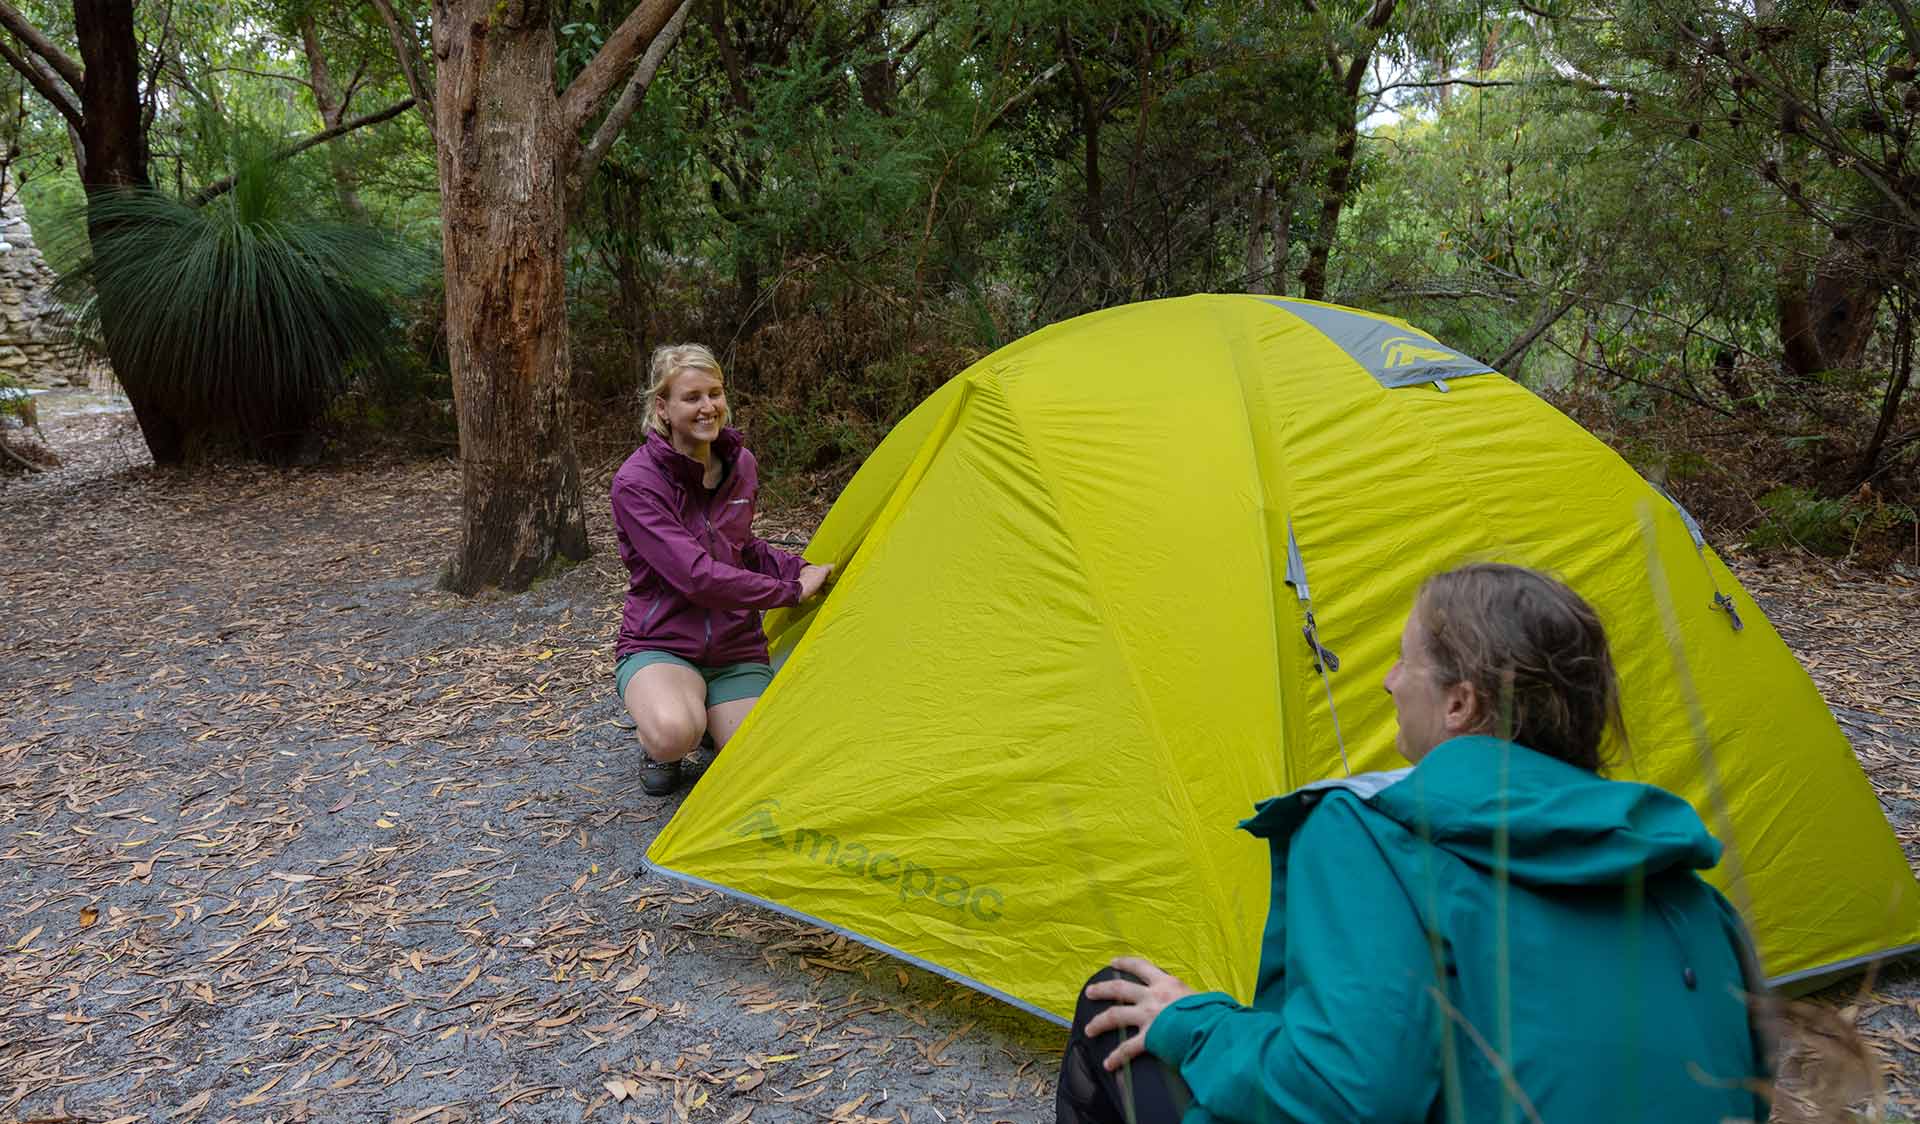 Two hikers set up a yellow tent near Halfway Hut on the Southern Circuit hiking trail at Wilsons Promontory National Park